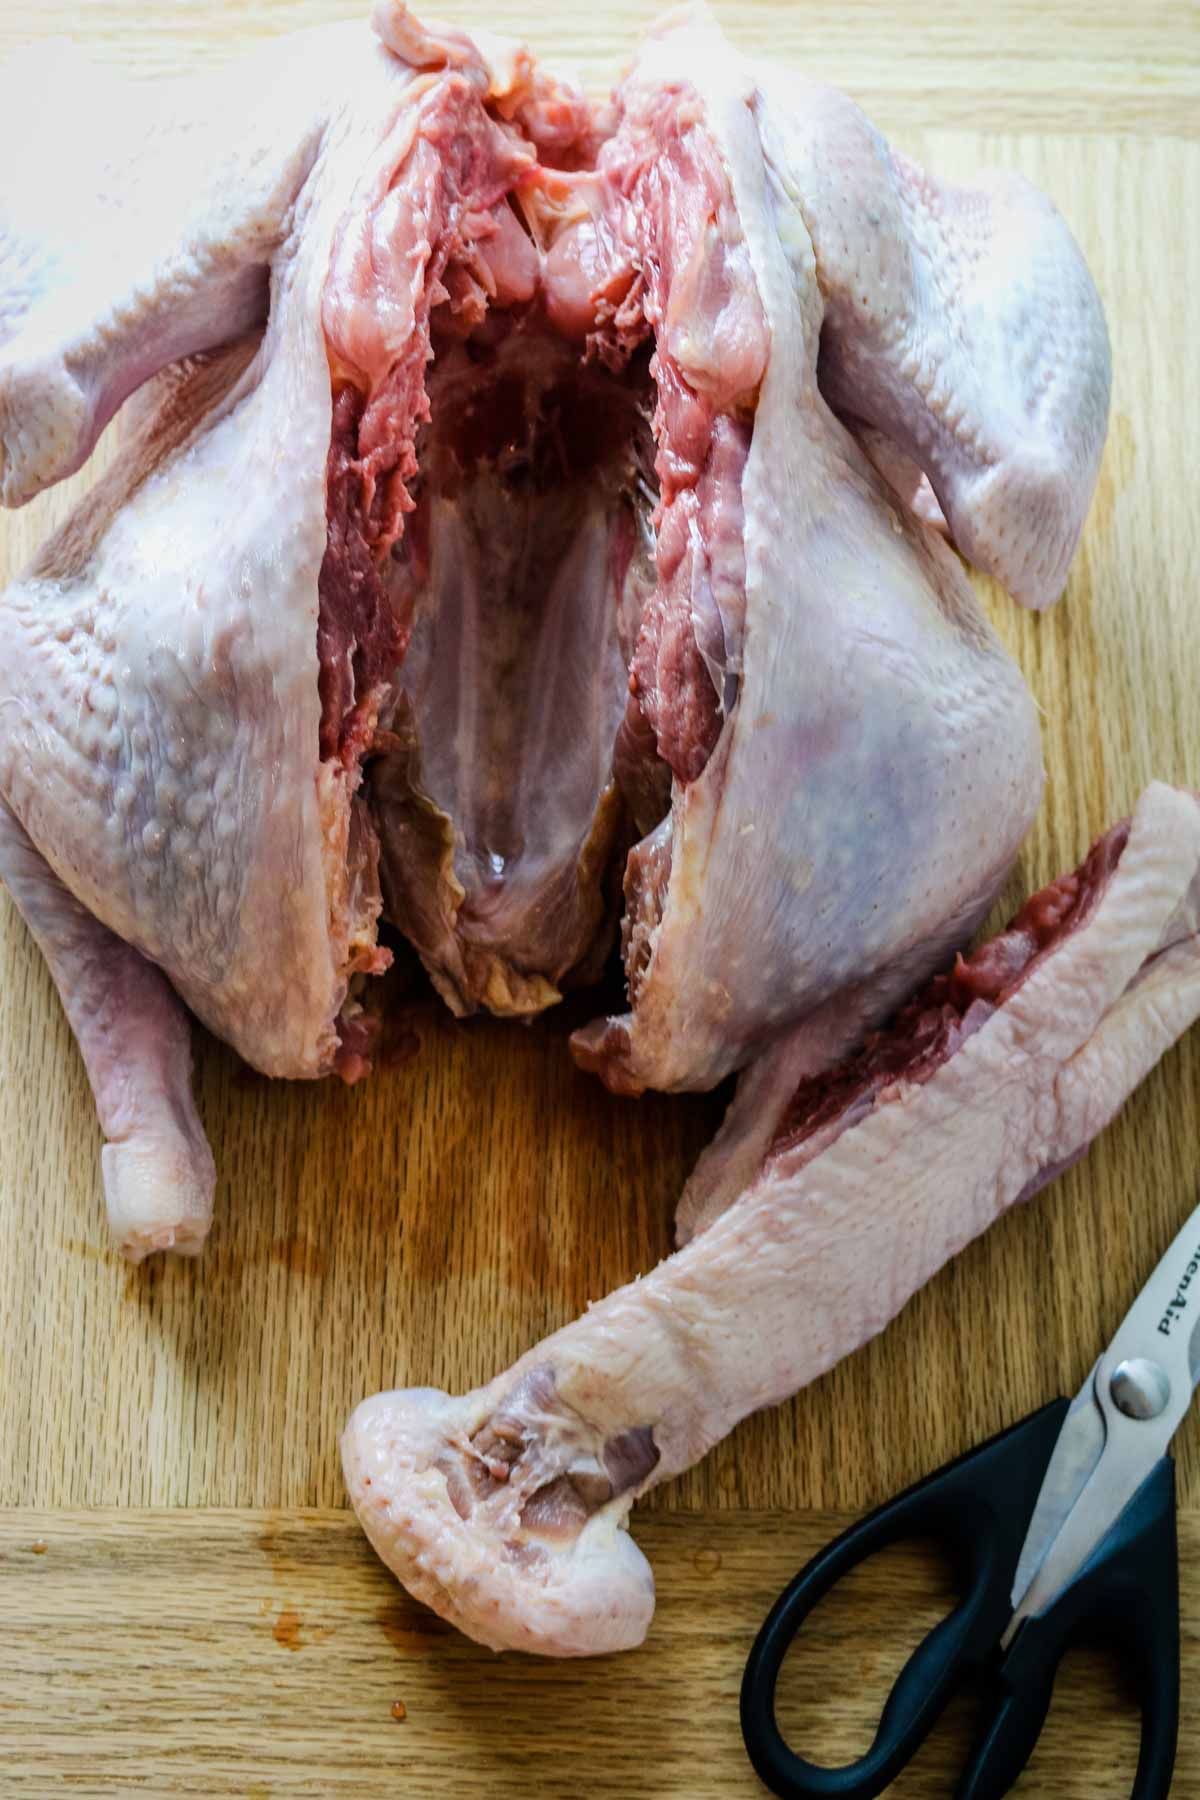 removed turkey back with kitchen shears